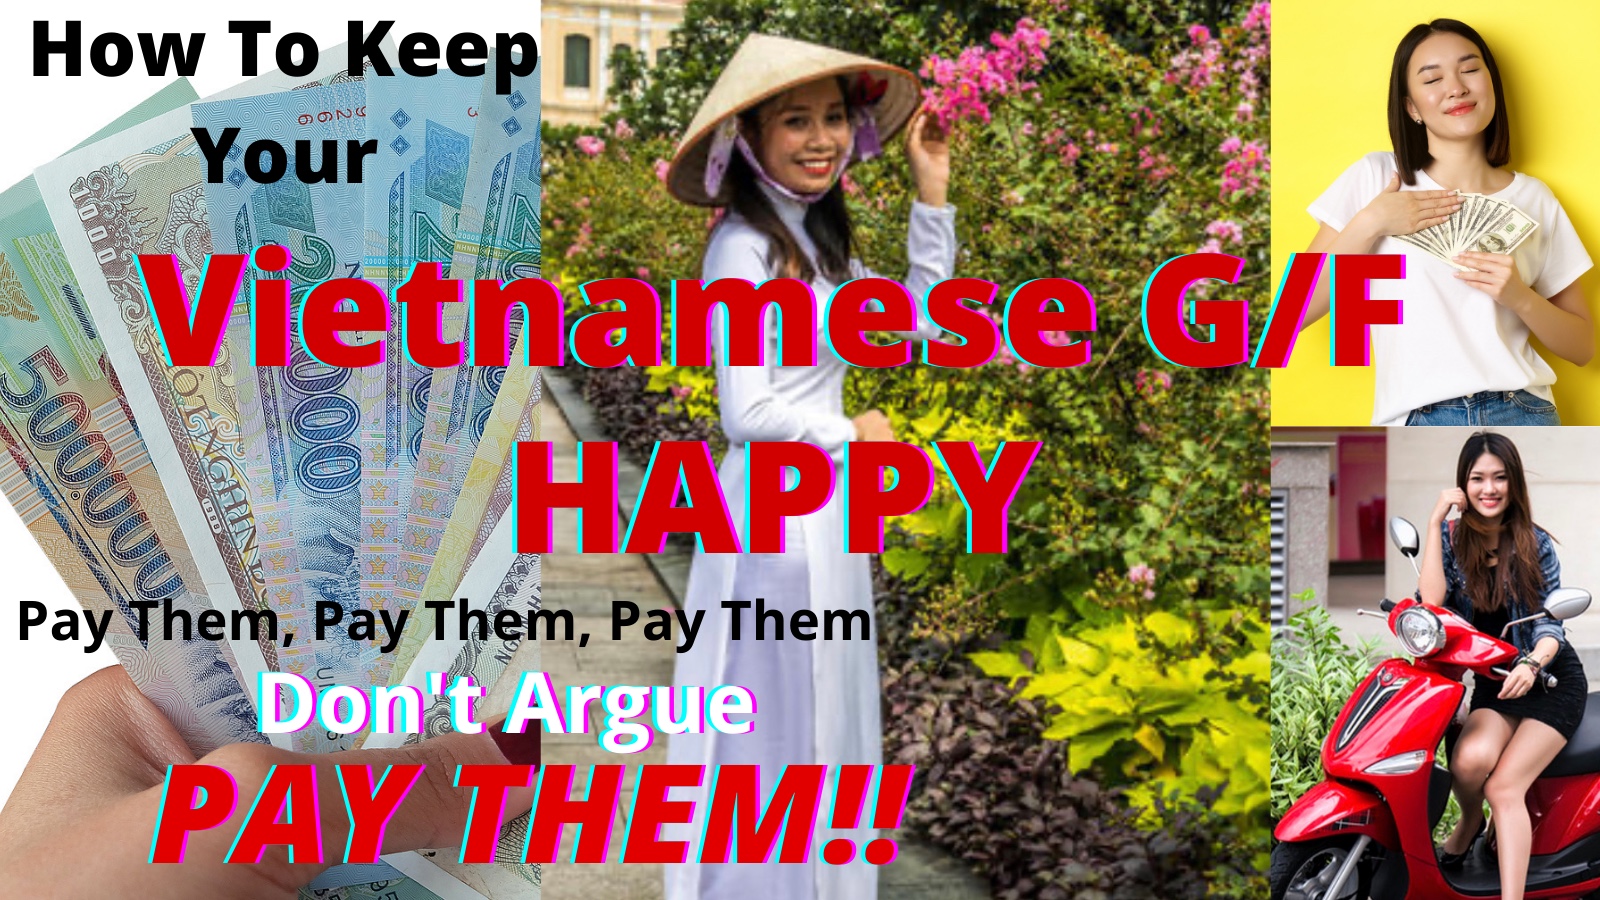 How To Keep Your VIETNAMESE GIRLFRIEND HAPPY in 2021… – Pay Them, Pay Them, – Don’t Argue – PAY THEM!!